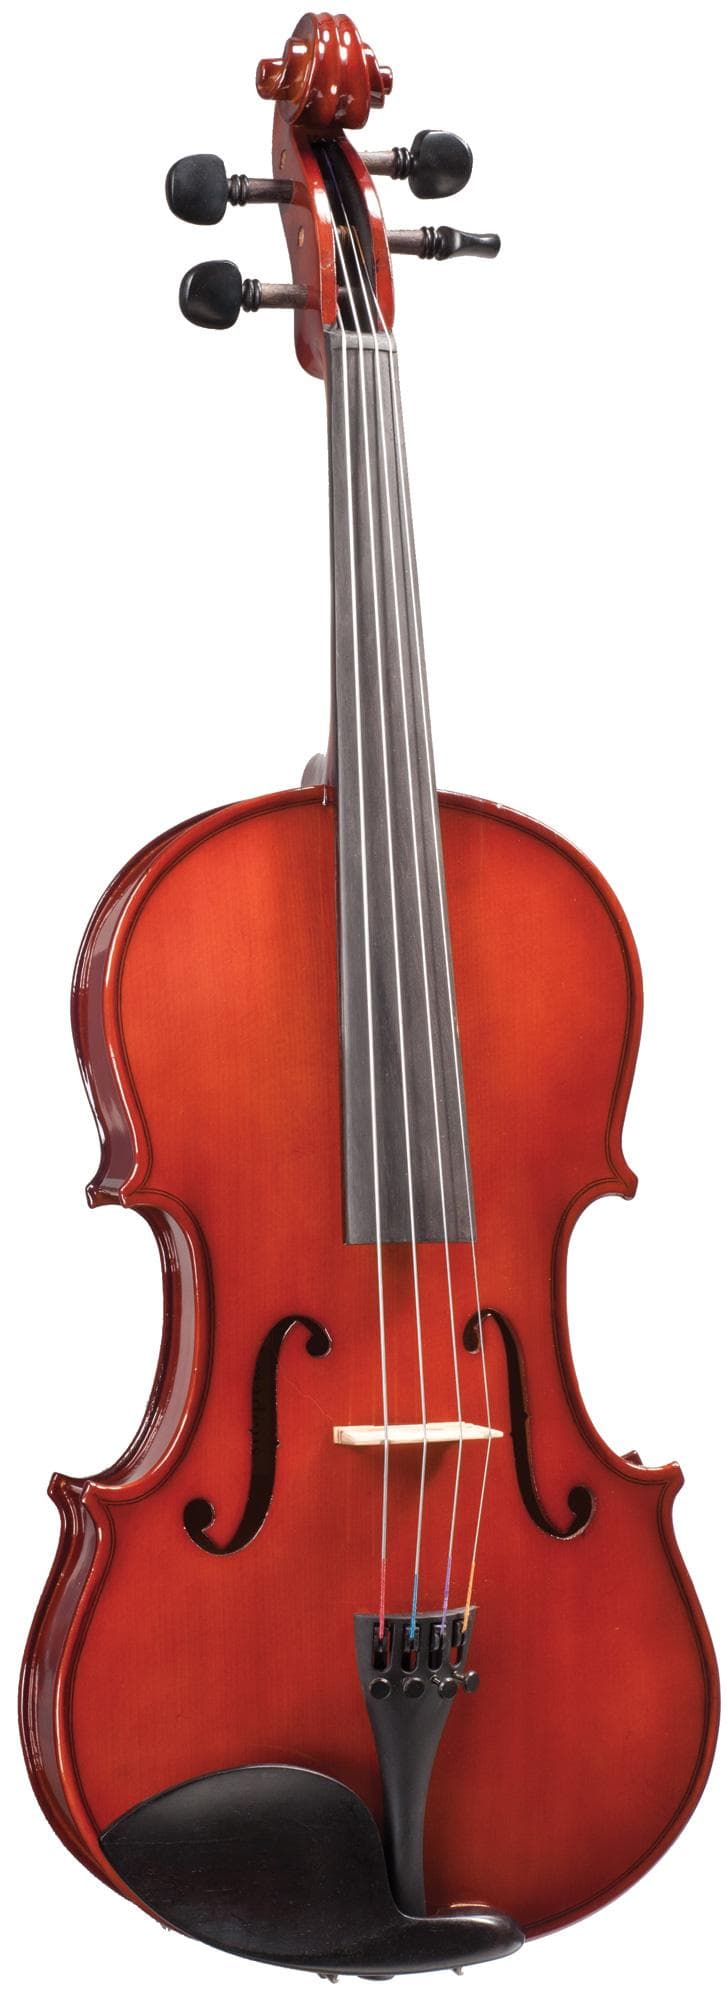 SharWay Standard Viola Outfit